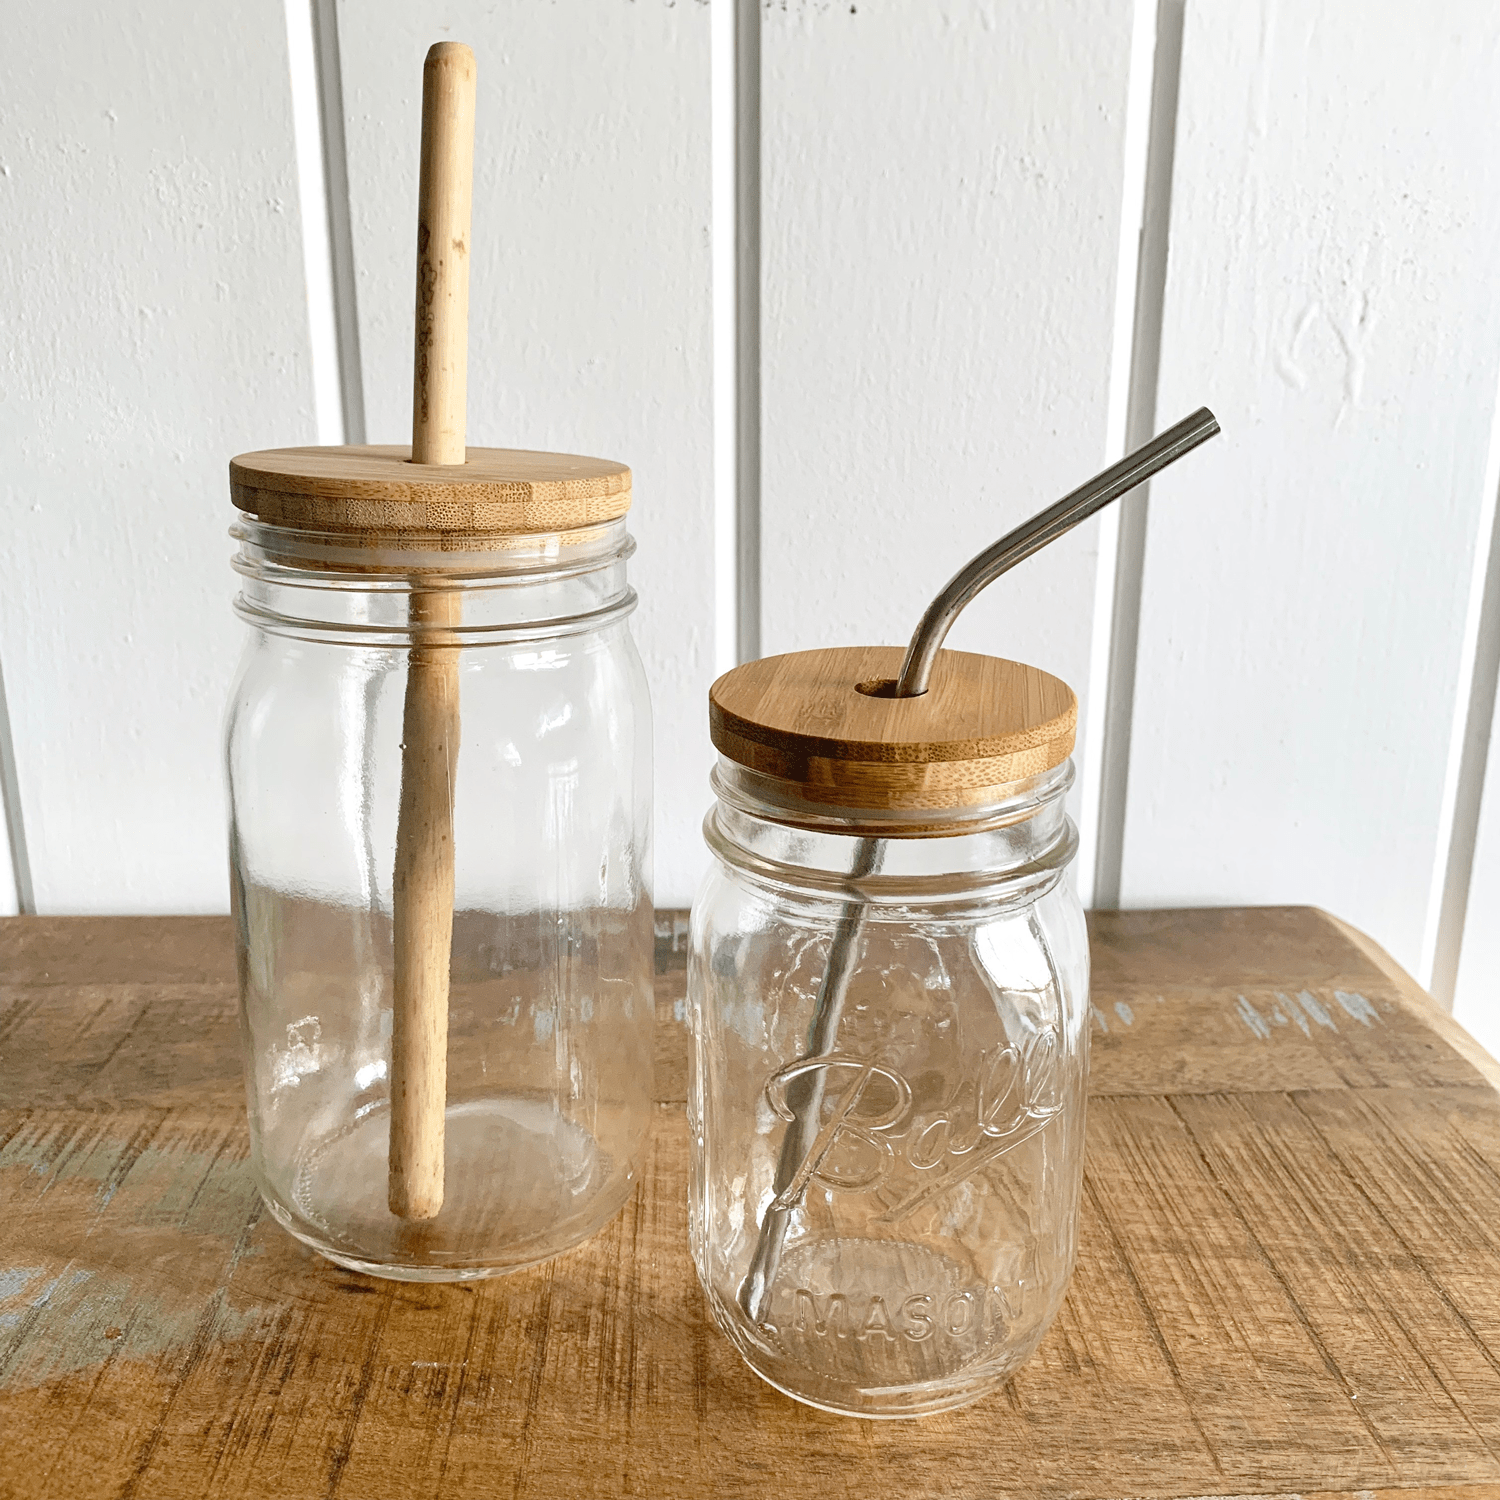 4 Pieces Wide Mouth Jar Lids with Straw Hole Bamboo Jar Lids, 2